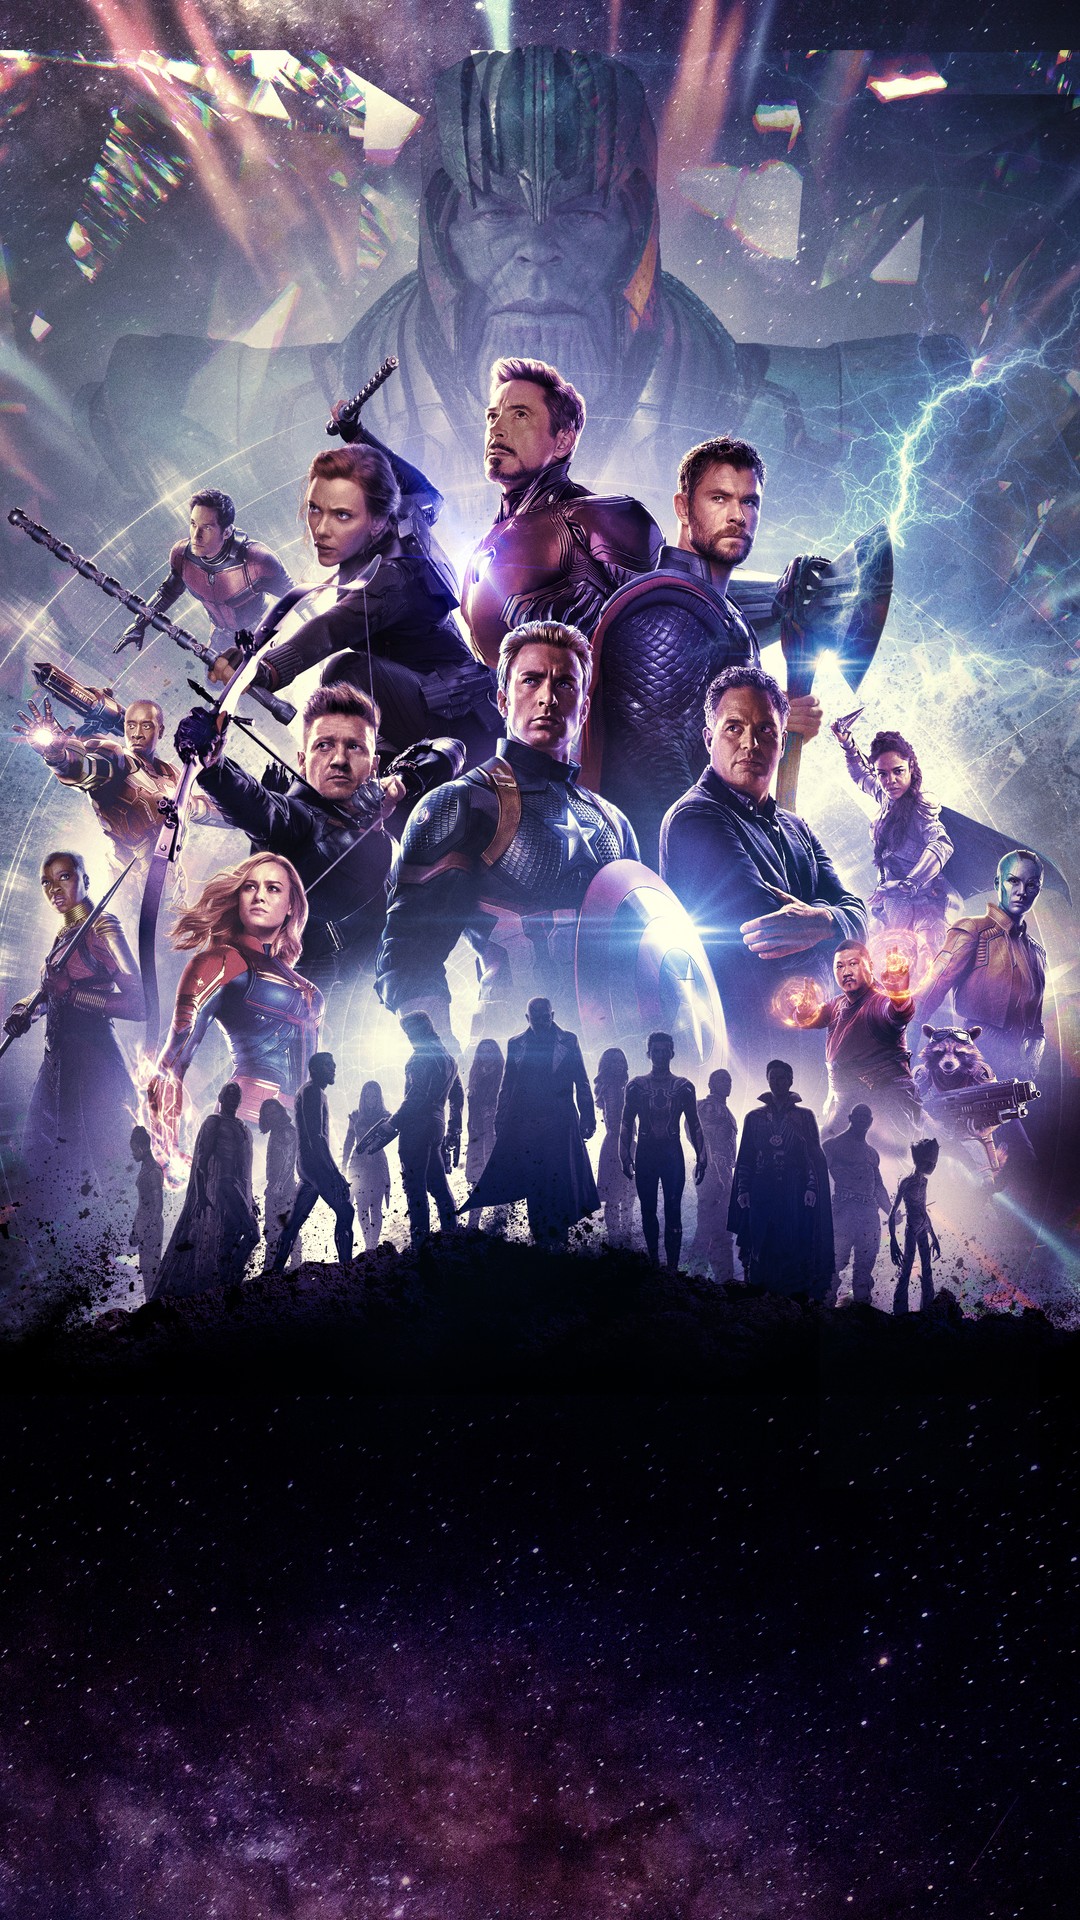 Avengers Endgame 2019 Android Wallpaper with high-resolution 1080x1920 pixel. You can use this poster wallpaper for your Desktop Computers, Mac Screensavers, Windows Backgrounds, iPhone Wallpapers, Tablet or Android Lock screen and another Mobile device